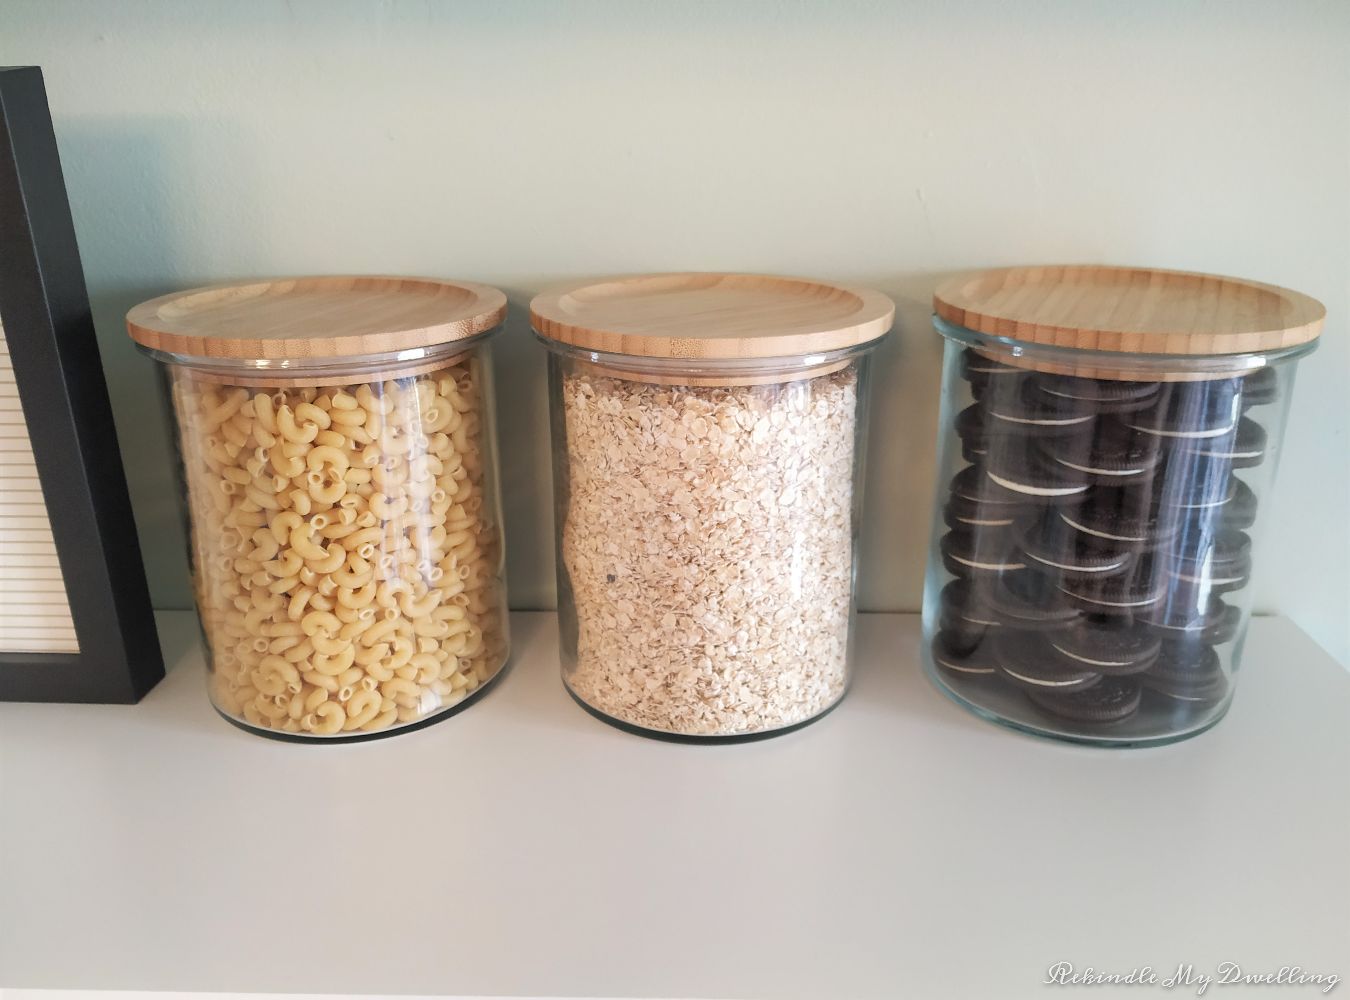 Glass jars filled with macaroni, oats and cookies.